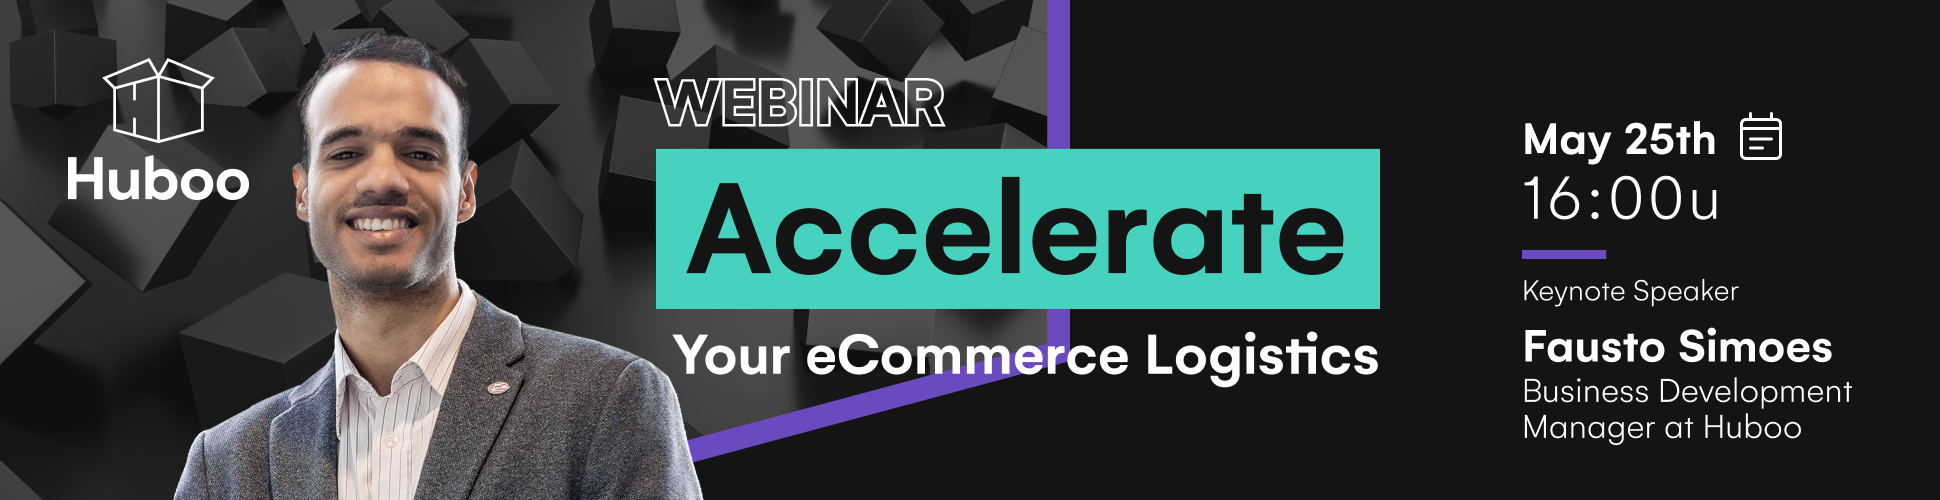 Accelerate your eCommerce Logistics, Online Event